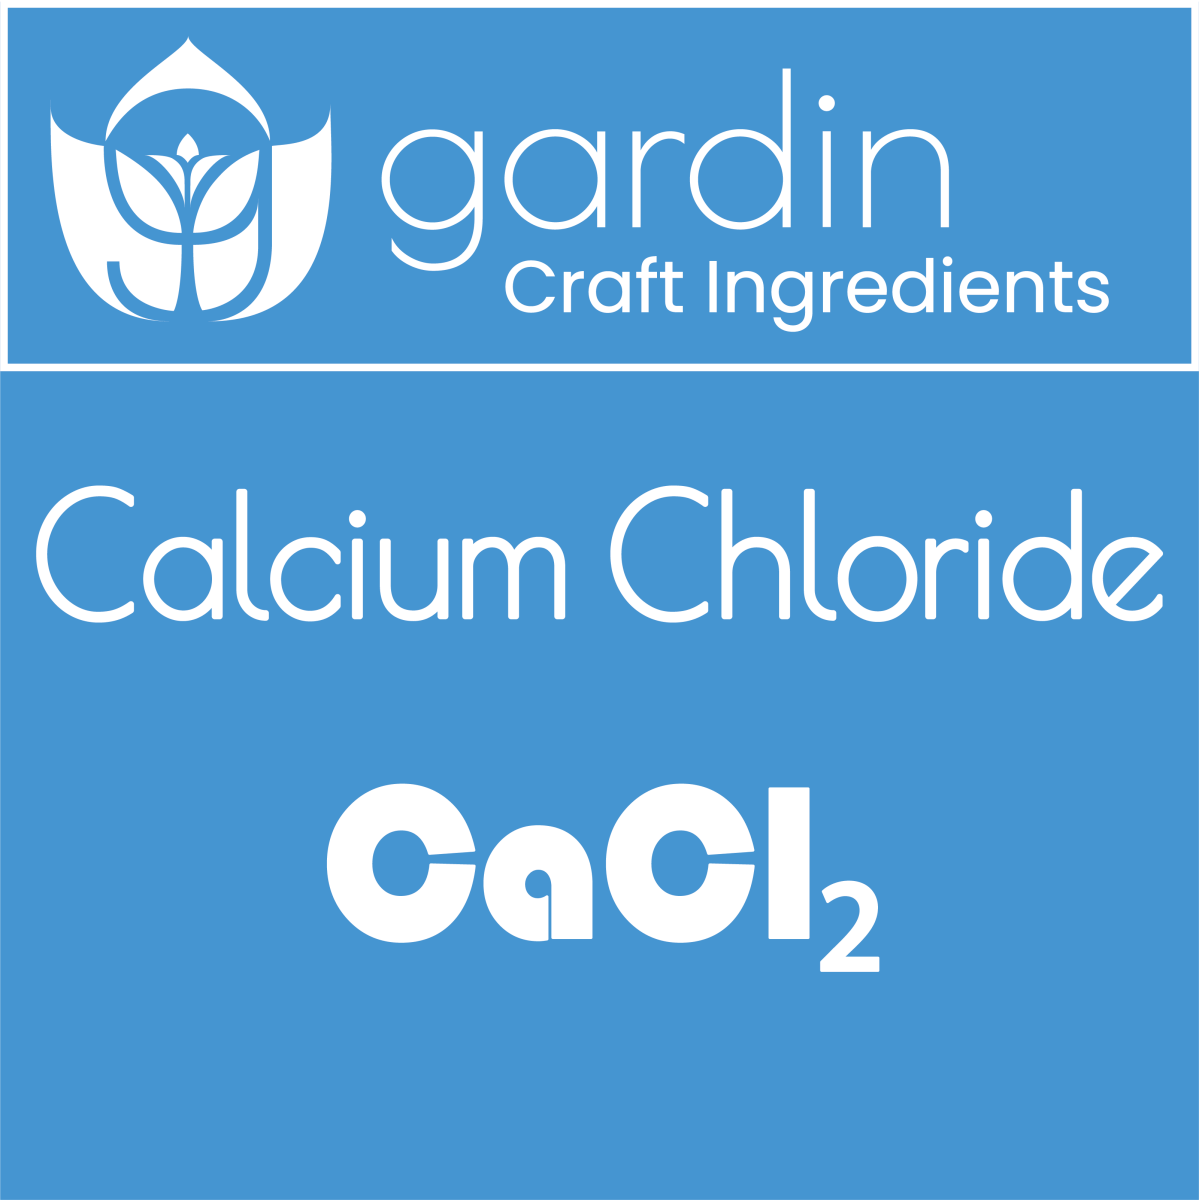 Nutrients, Additives & Solutions - Calcium Chloride - Gardin Warehouse